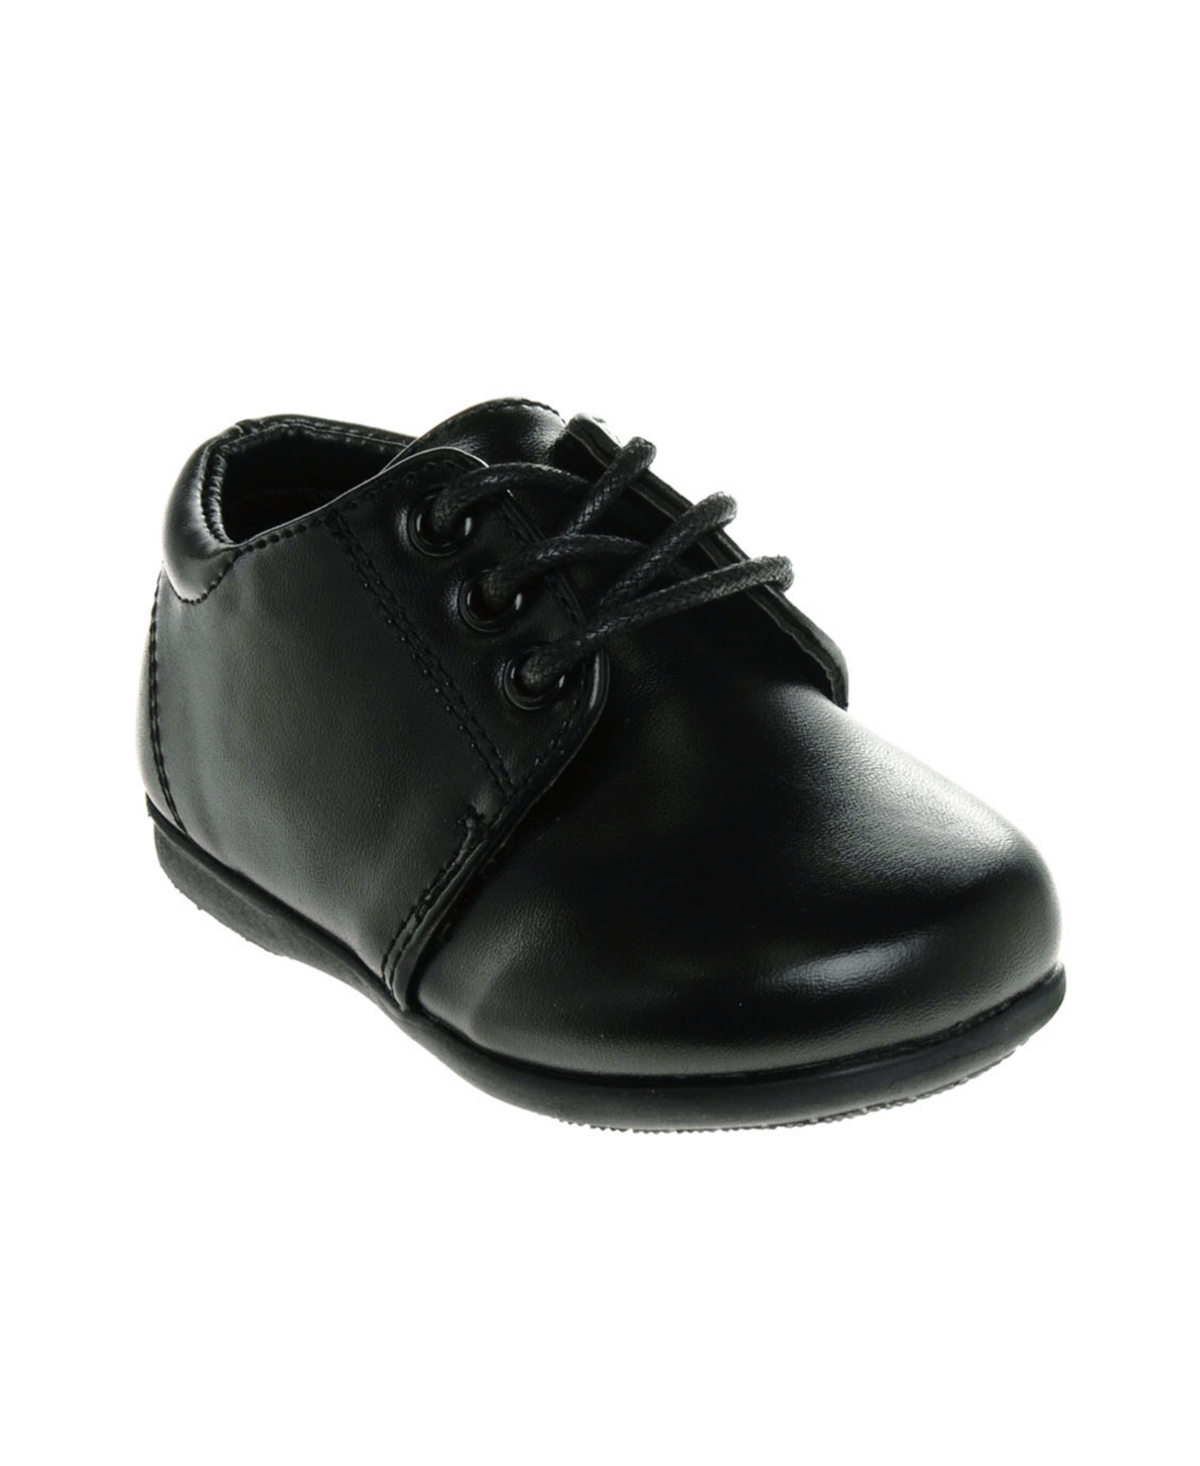 Josmo Kids' Little Boys Lace Up Dress Shoes In Black